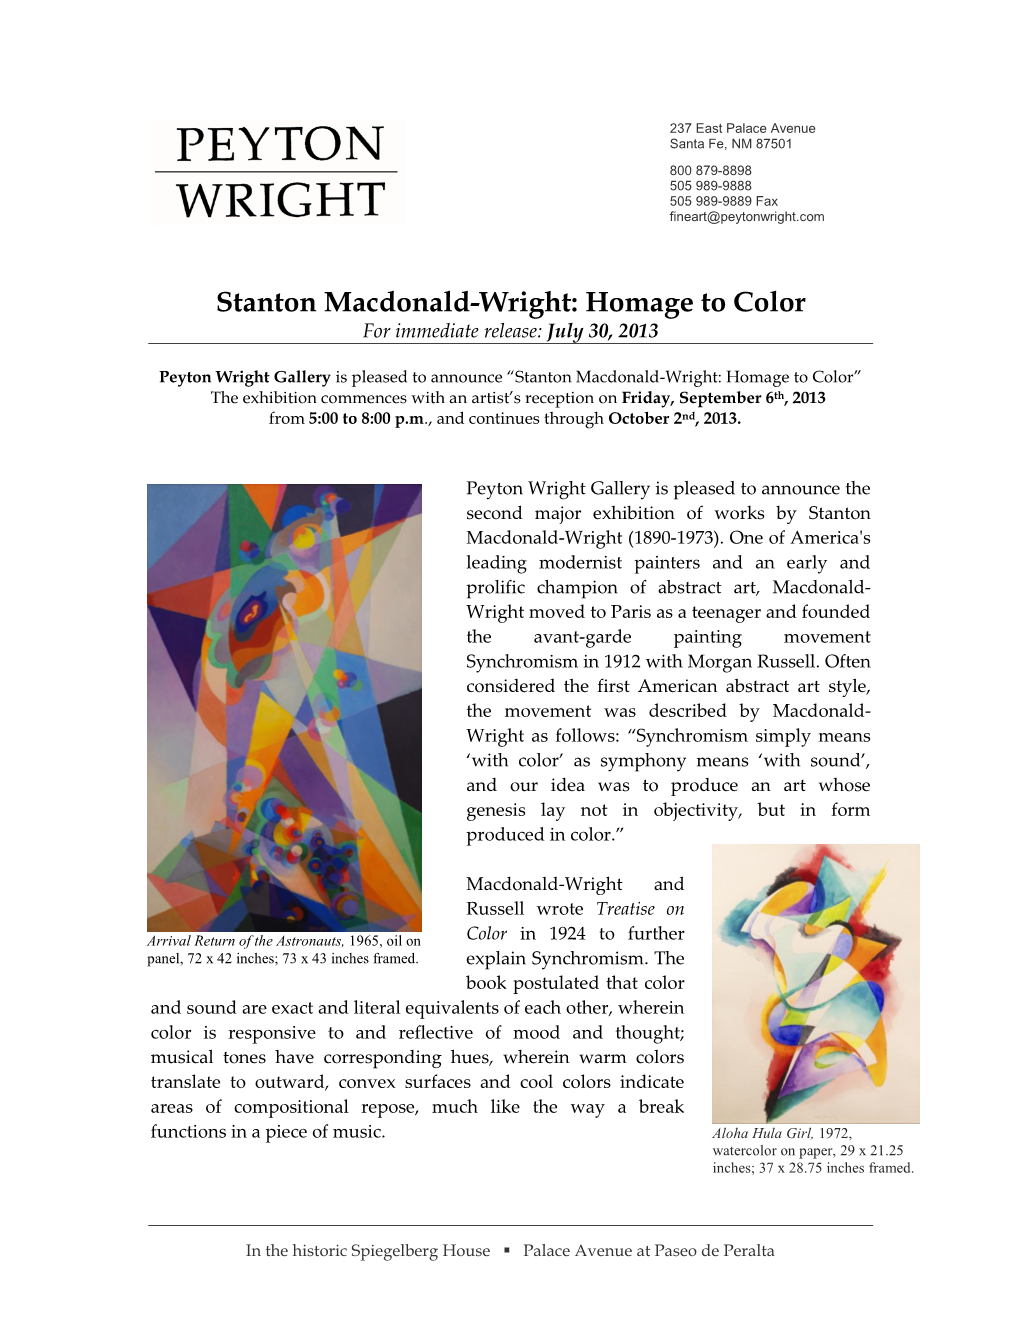 Stanton Macdonald-Wright: Homage to Color for Immediate Release: July 30, 2013